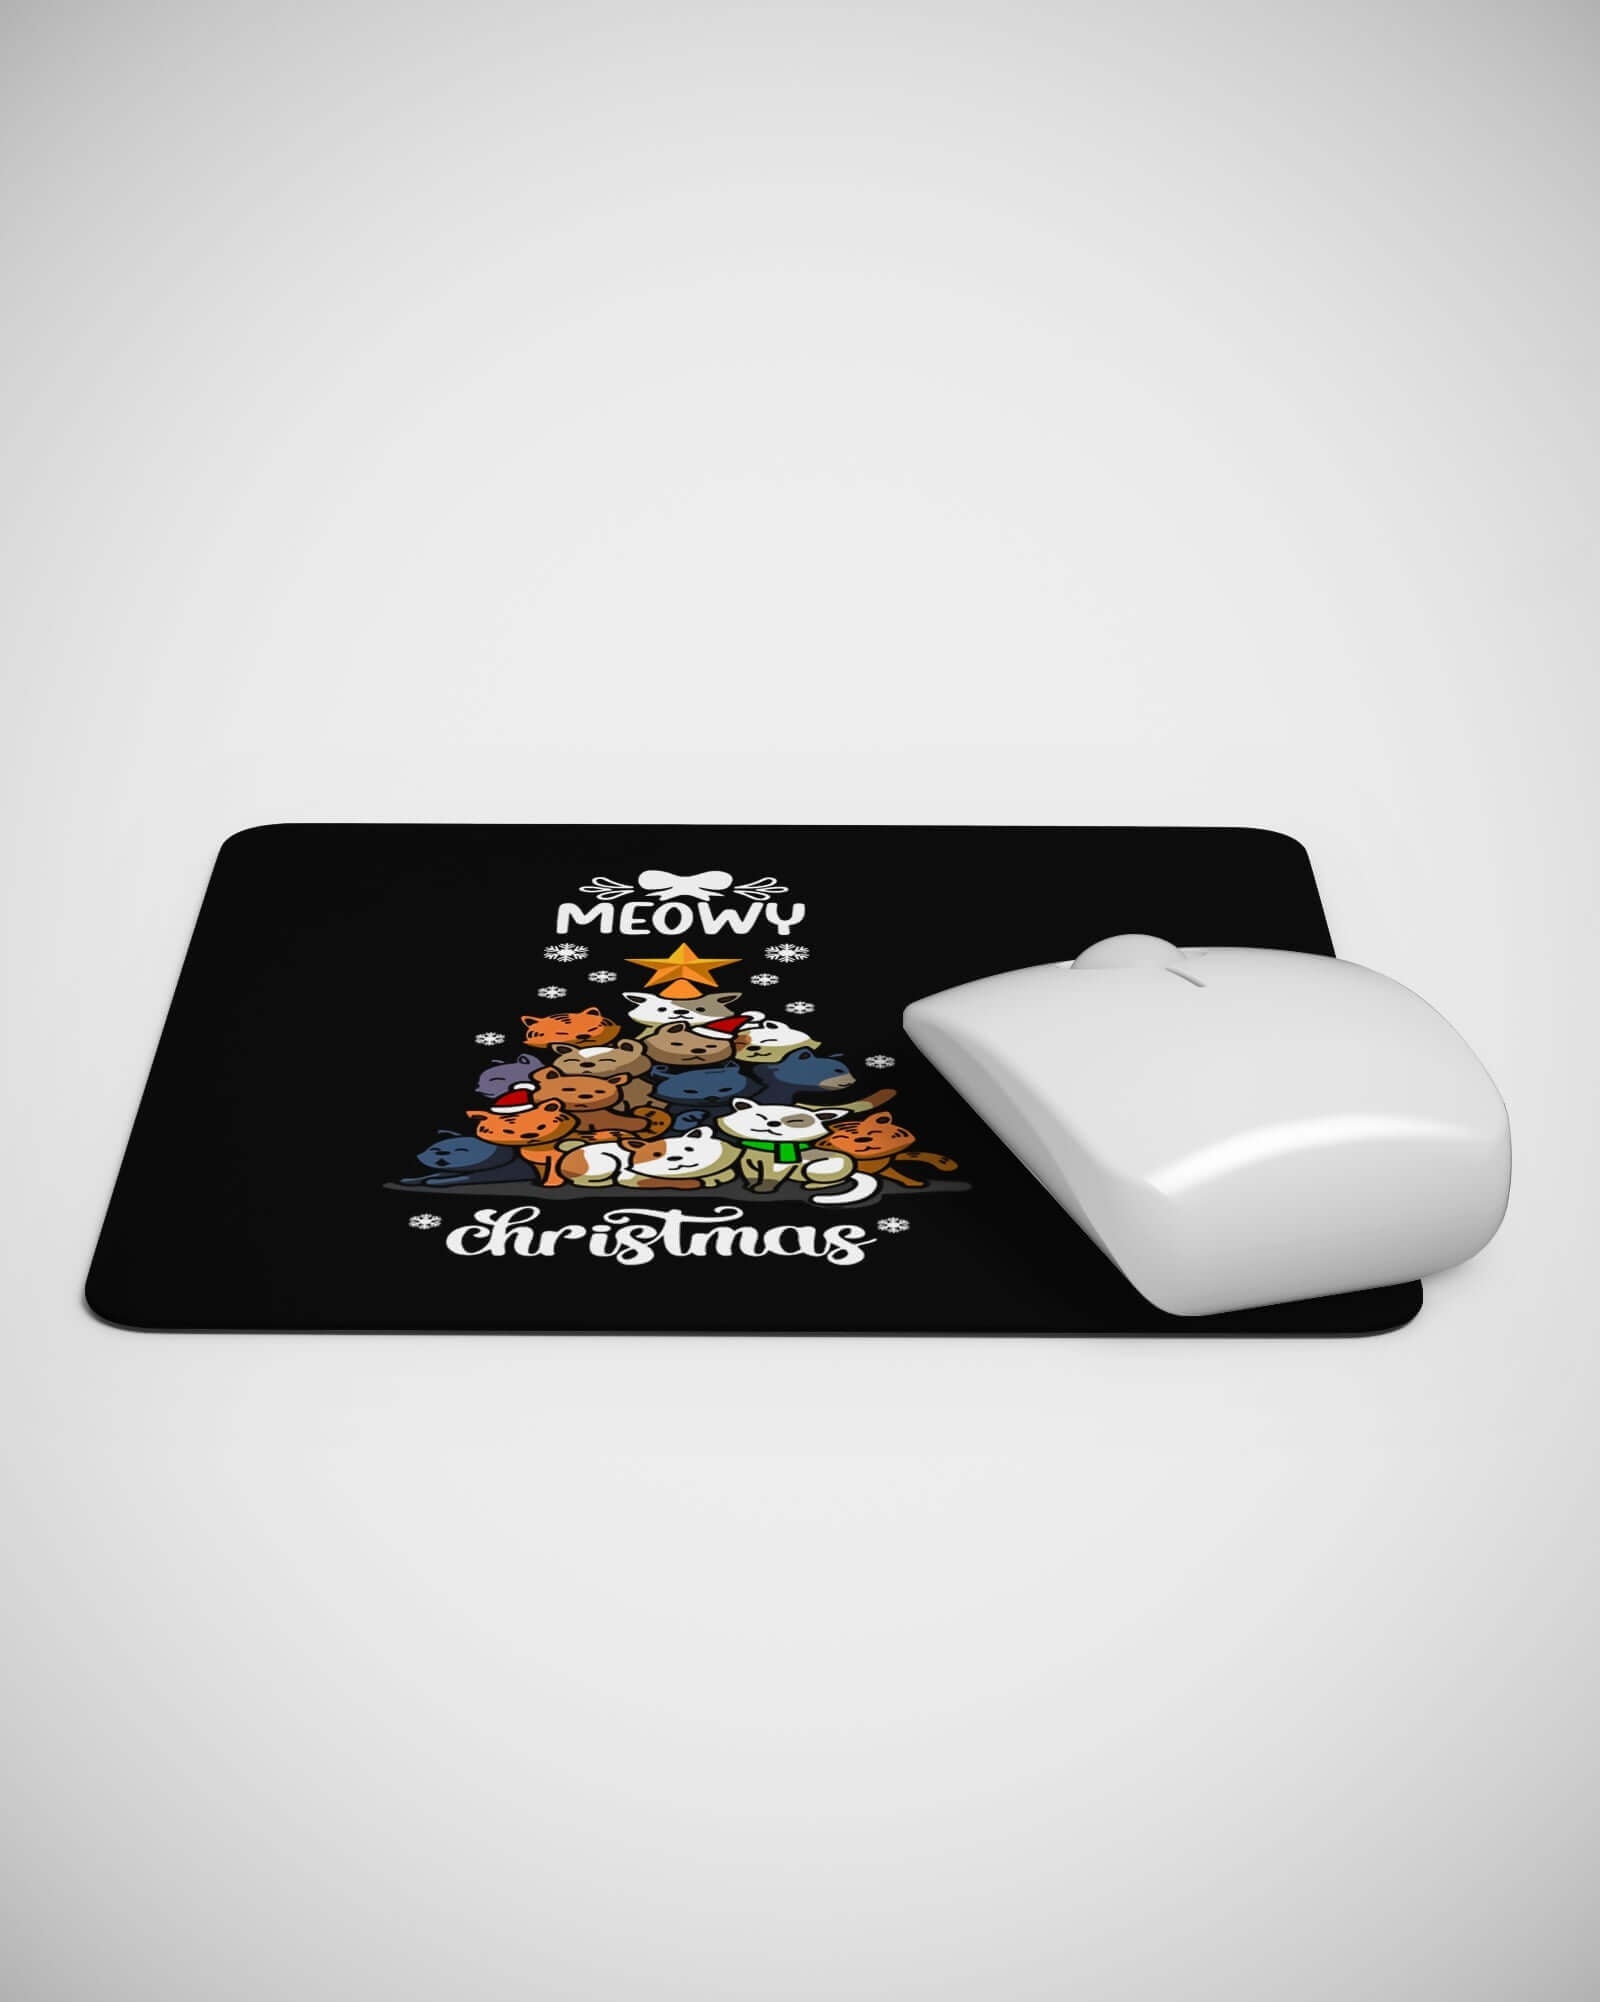 Meowy Christmas Mouse pad - ApparelinClick